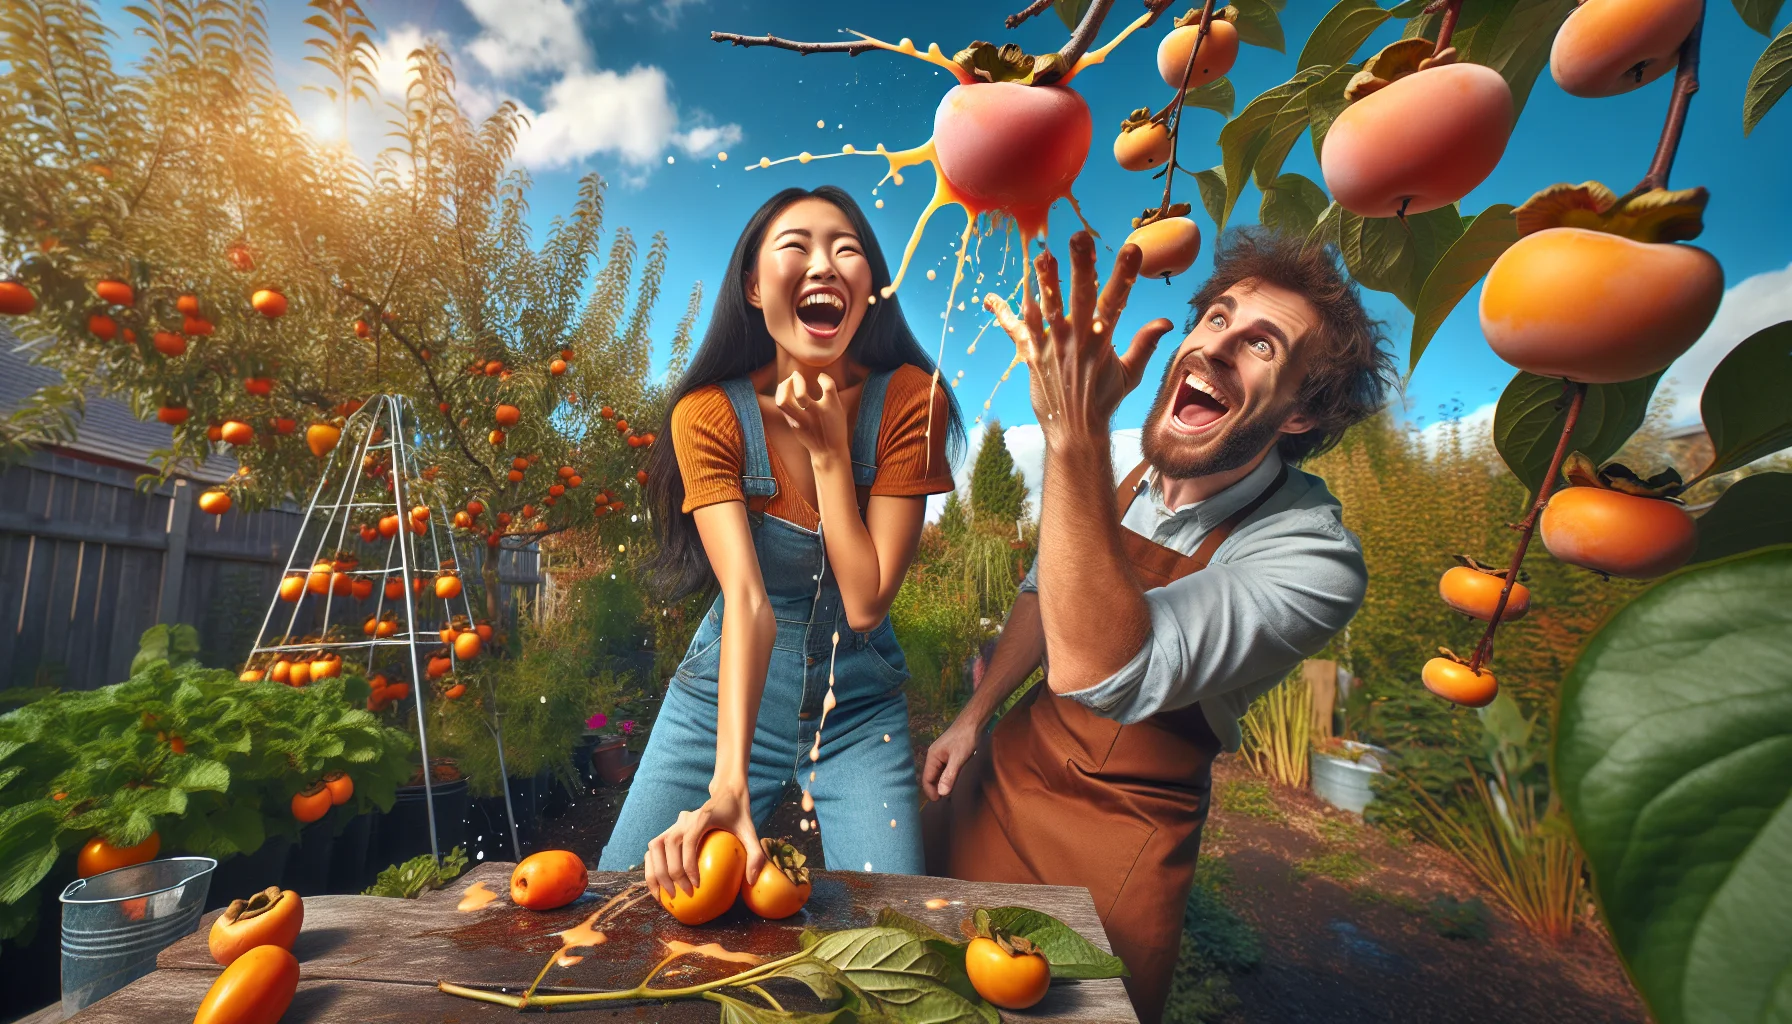 Imagine an outdoor gardening scenario under a clear blue sky. In the center of the scene, an Asian woman and a White man are wonderfully engaged in gardening. Suddenly, they discover a ripe, tangerine-colored persimmon hanging from a tree branch. The woman reaches out, plucks the fruit, and takes a big, juicy bite with gusto. The juice splatters everywhere causing them to laugh uproariously. The radiant smile on their faces highlights the joy gardening brings and the added delight of enjoying fresh produce right from the tree. The background shows an array of different plants, highlighting the beauty of nature's bounty.